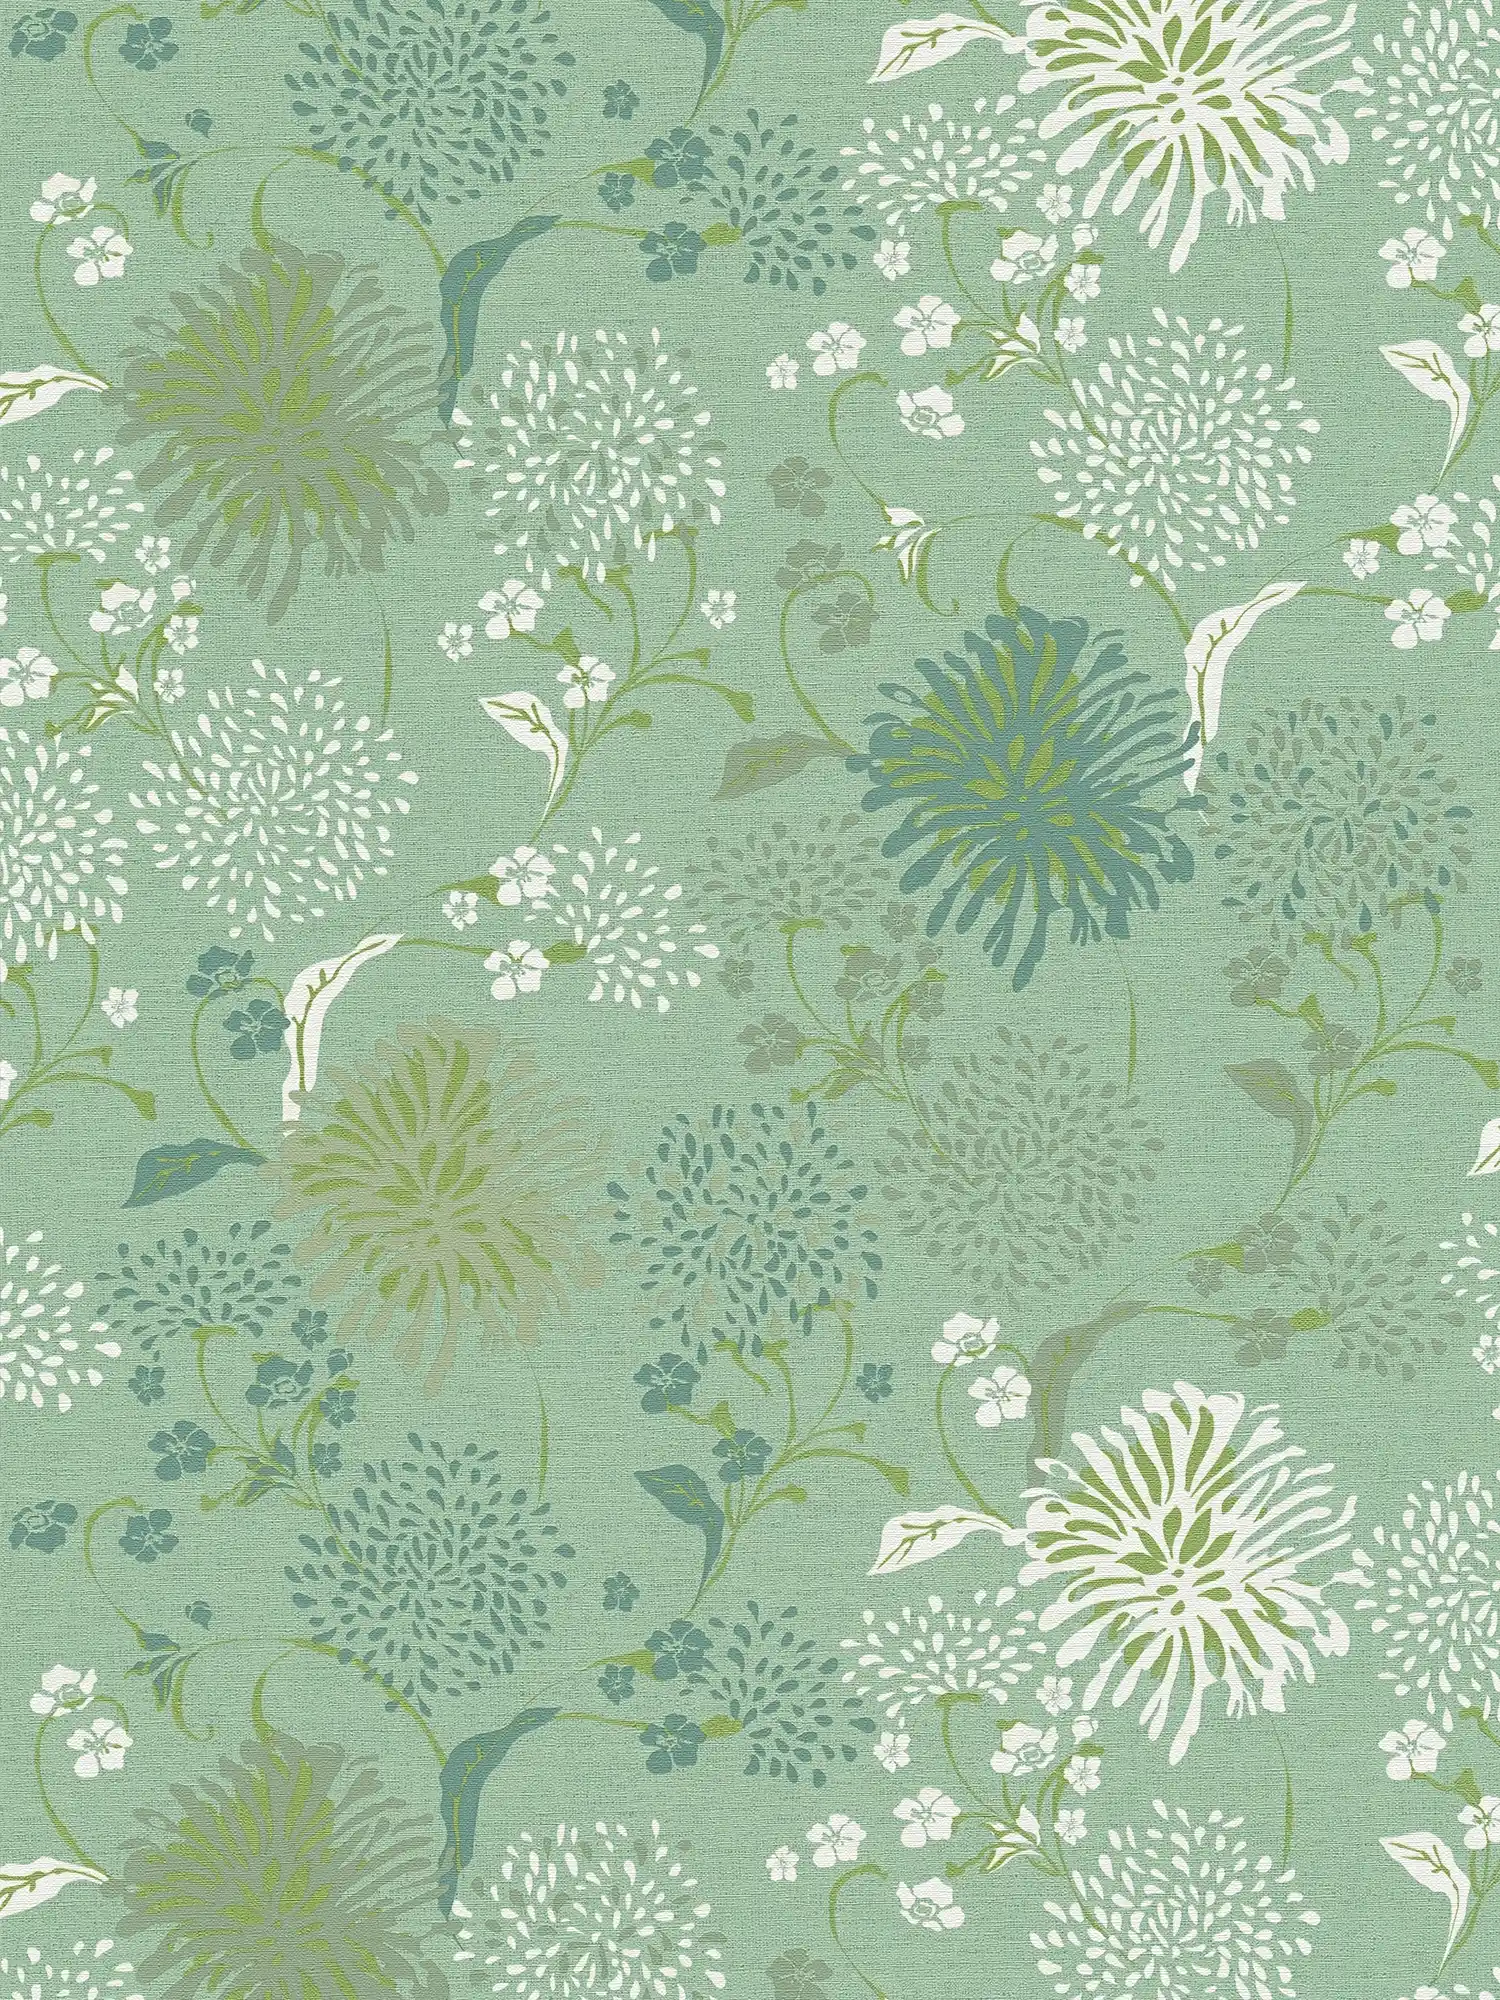 Non-woven wallpaper with floral dandelion pattern - green, white
